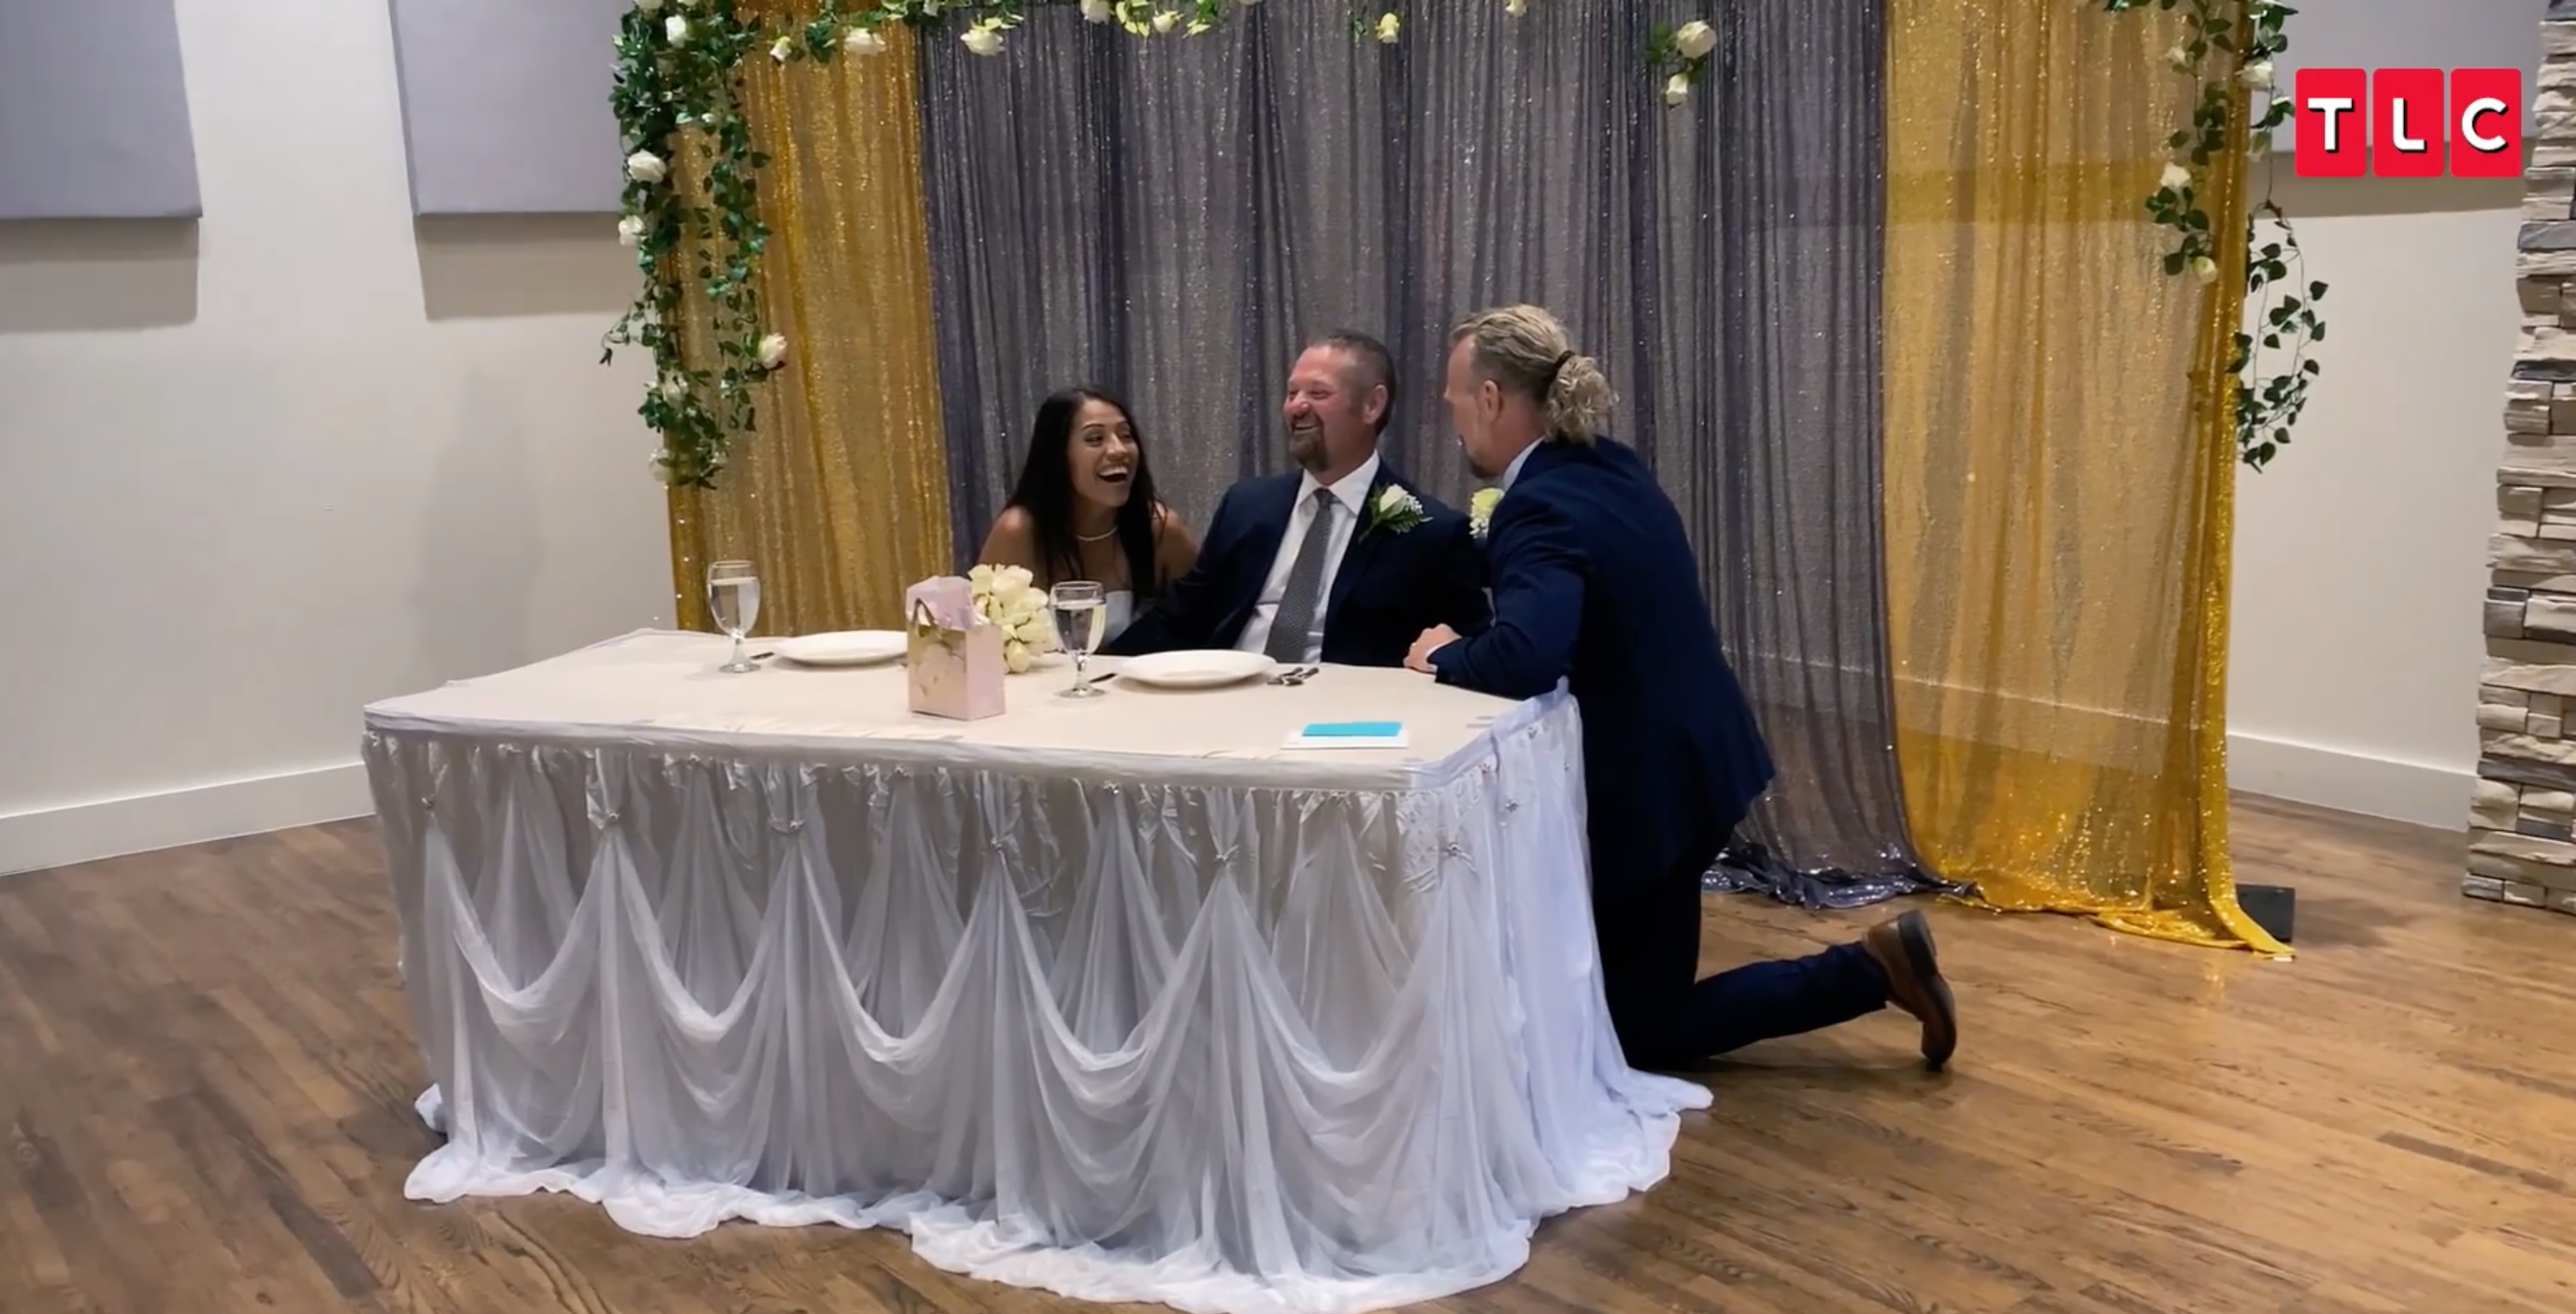 Kody Brown talking to the bride and groom after officiating their wedding on 'Sister Wives' Season 17 on TLC.